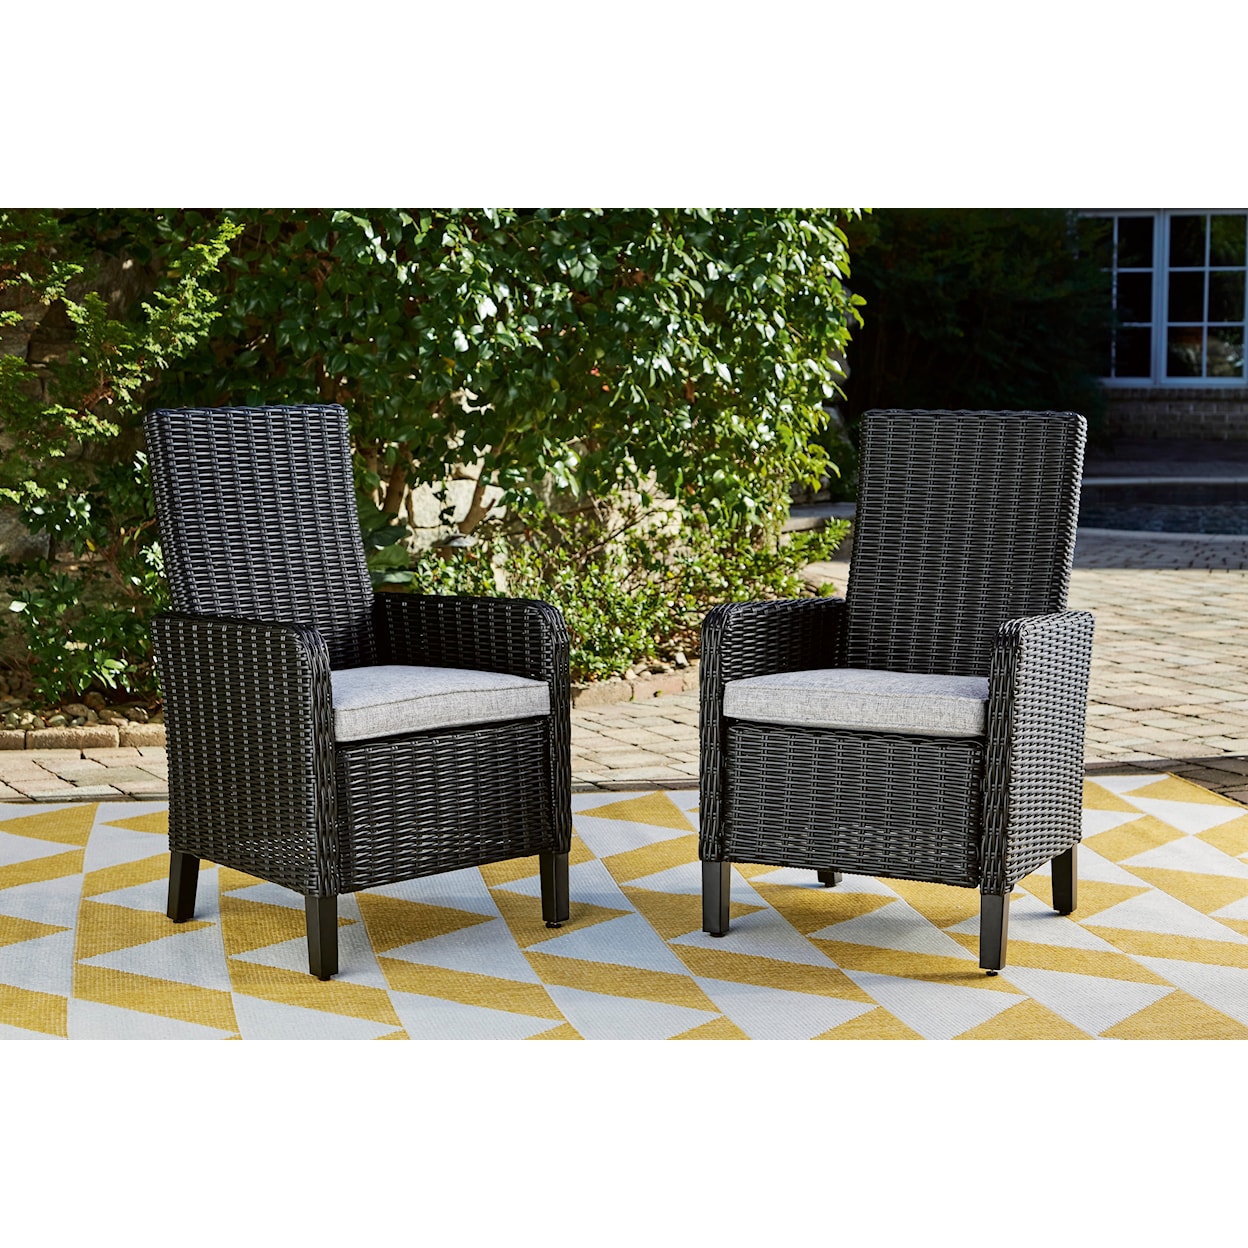 Signature Beachcroft Set of 2 Arm Chairs with Cushion